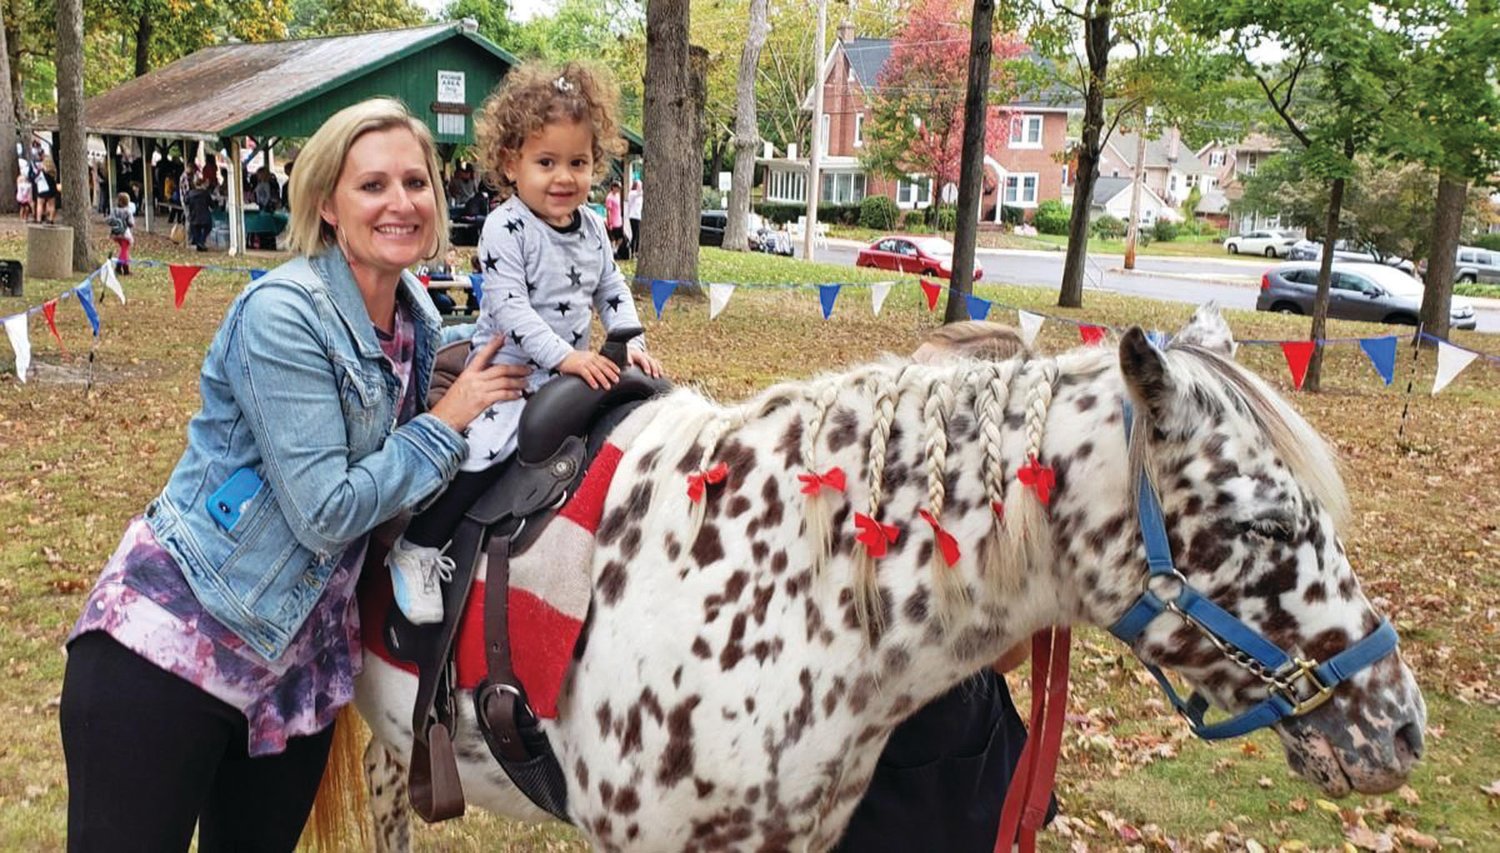 Perkasie Fall Festival offers family fun in two locations The Bucks